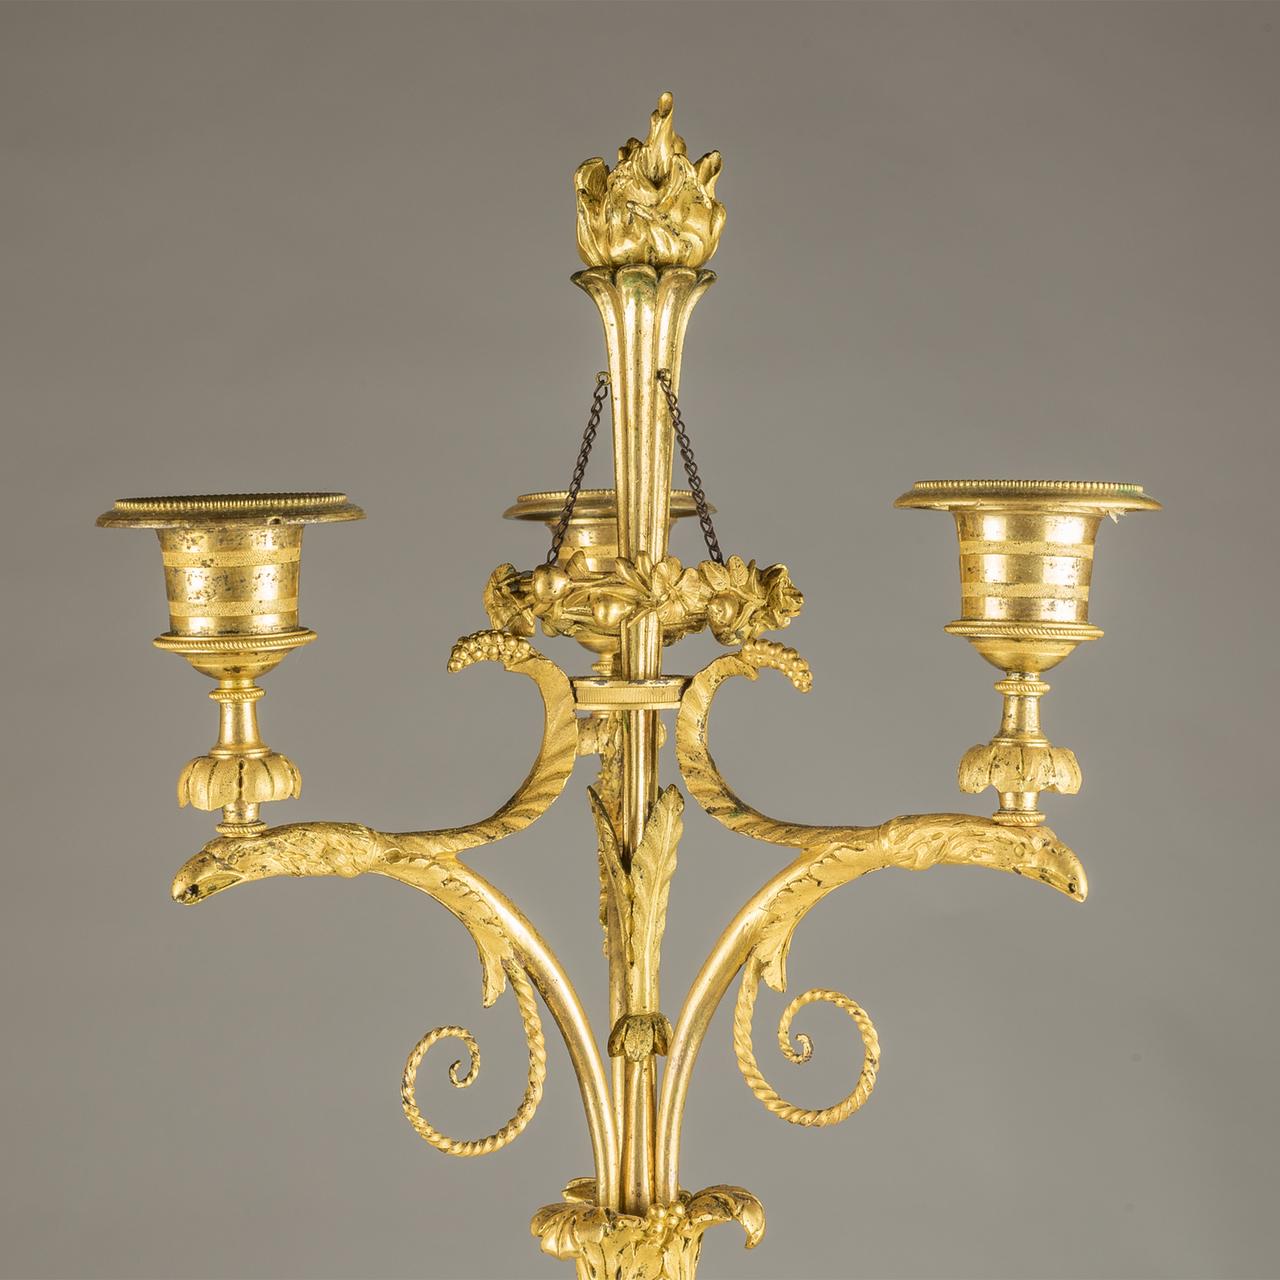 Exceptional Pair of Directoire Ormolu and Marble Three-Light Figural Candelabra For Sale 1